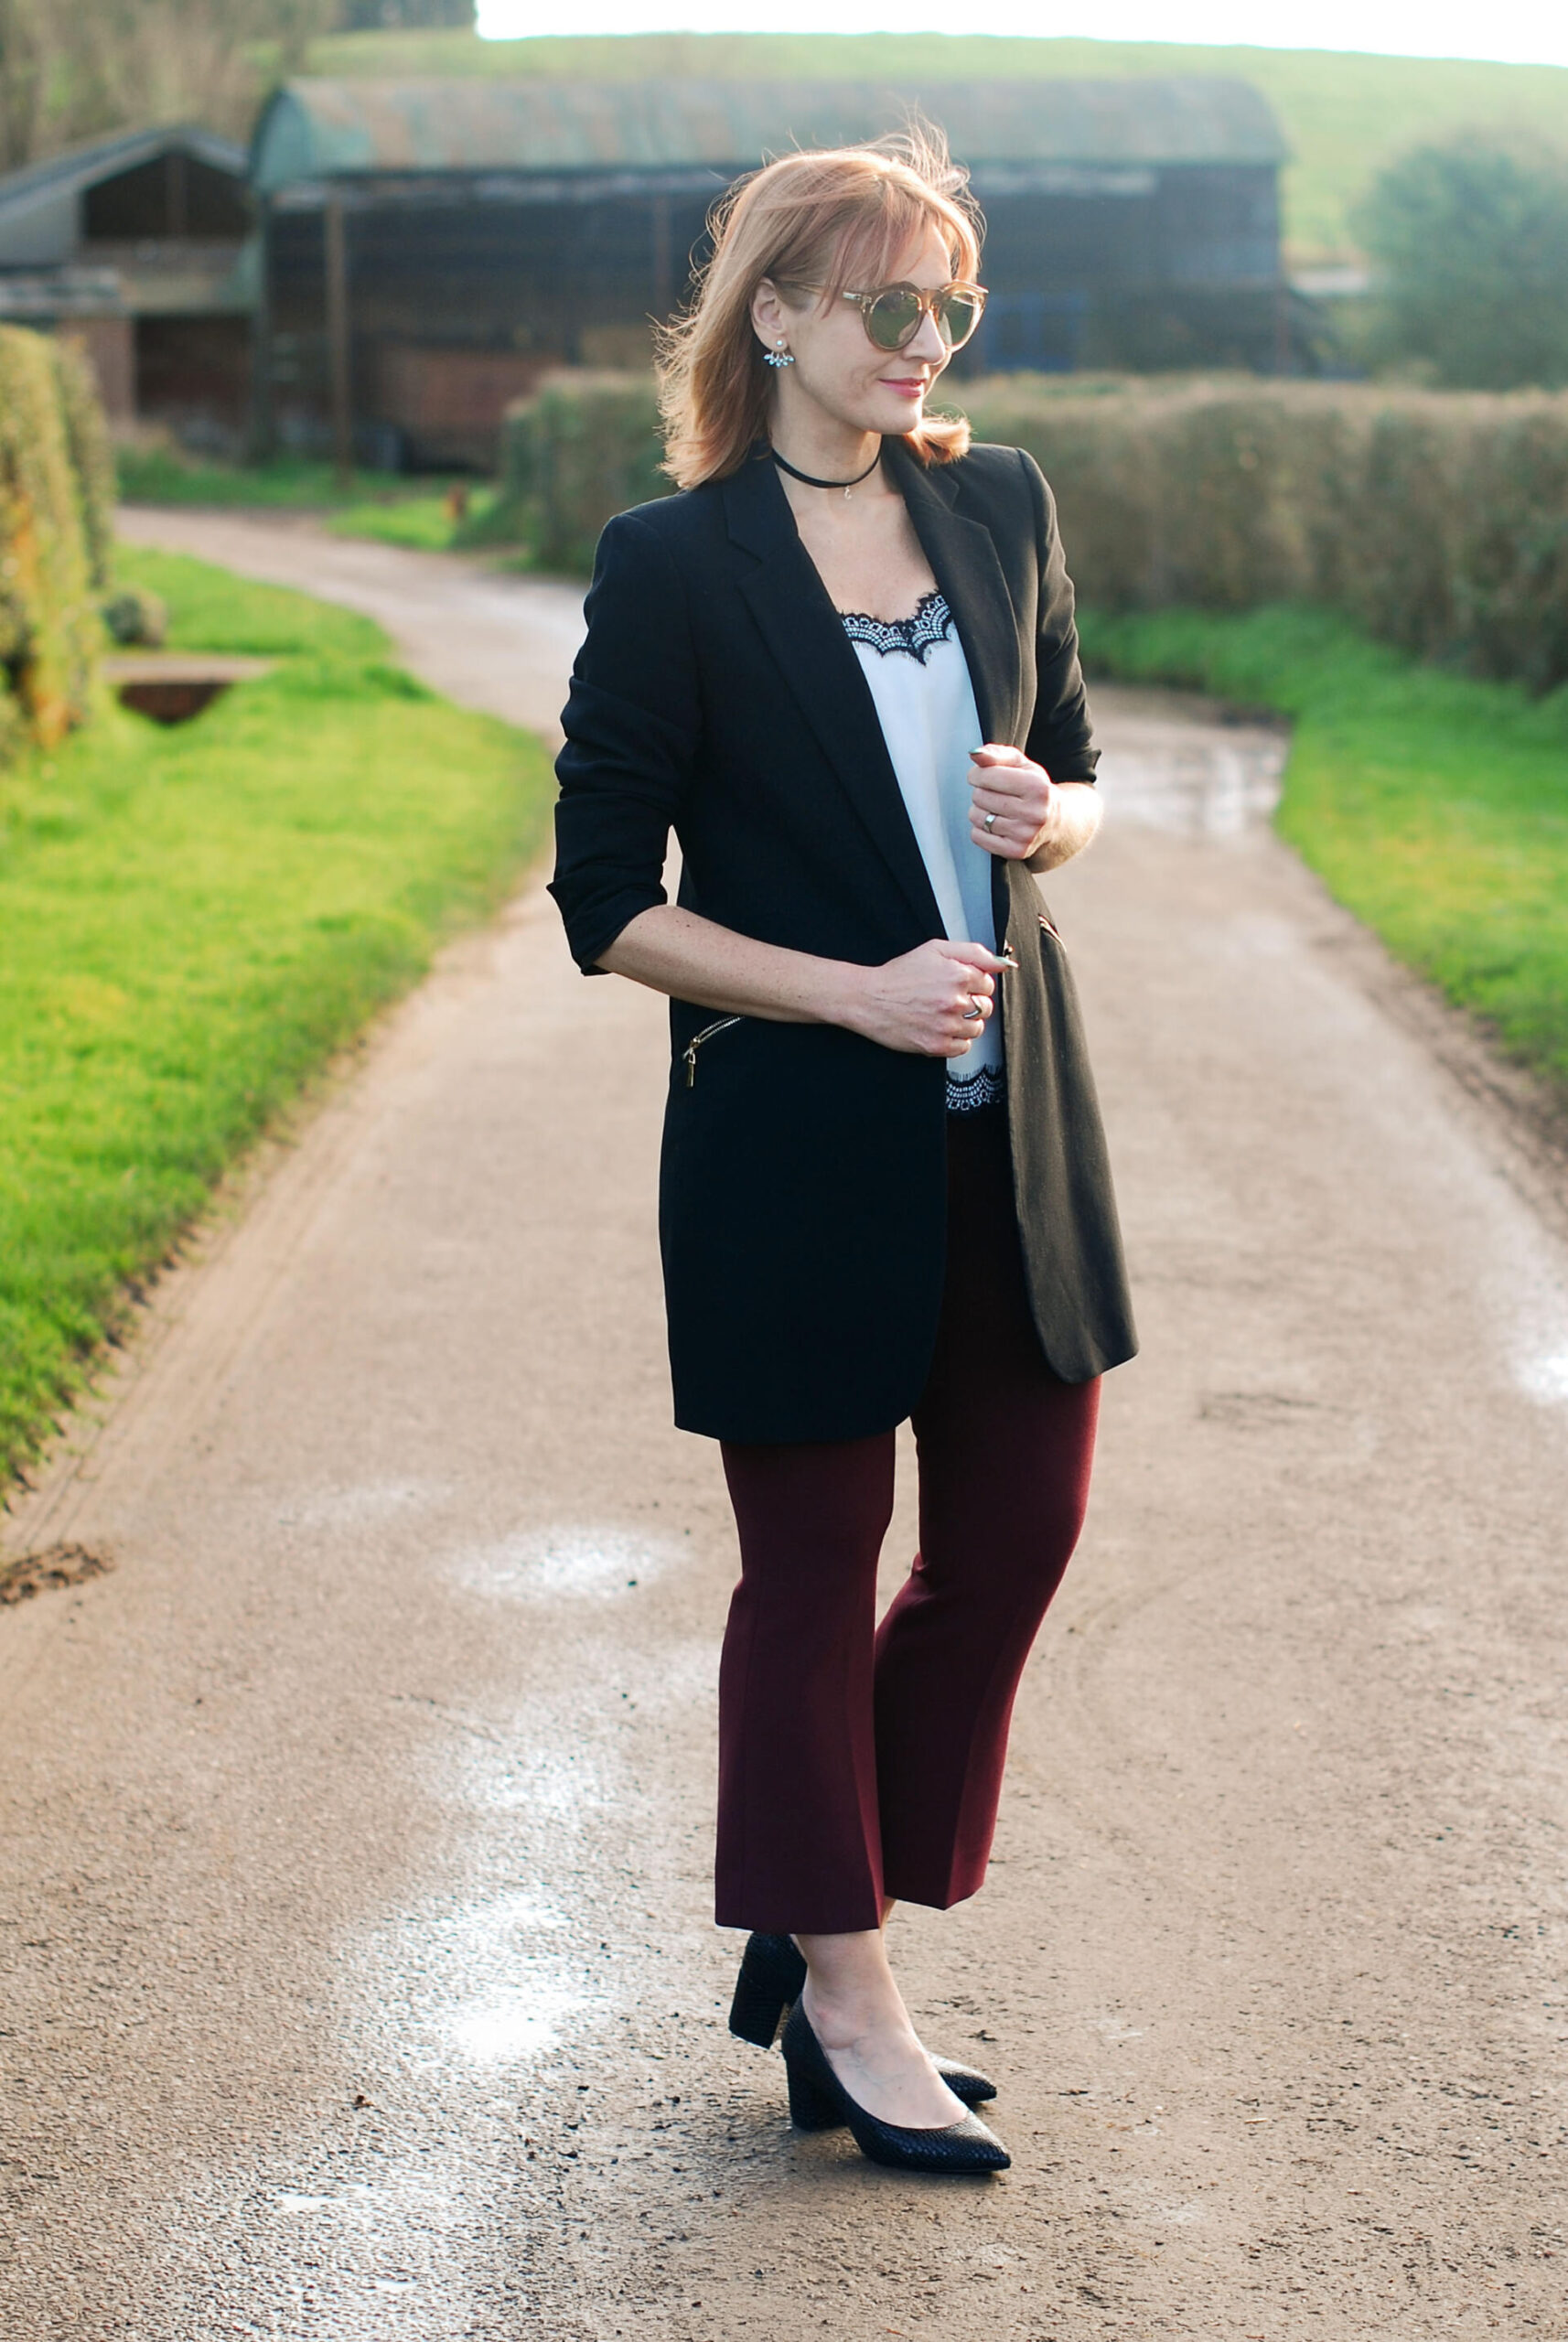 Longline blazer: Workwear Ideas, What to Wear to the Office Post-Pandemic | Not Dressed As Lamb, Over 40 Style and Fashion